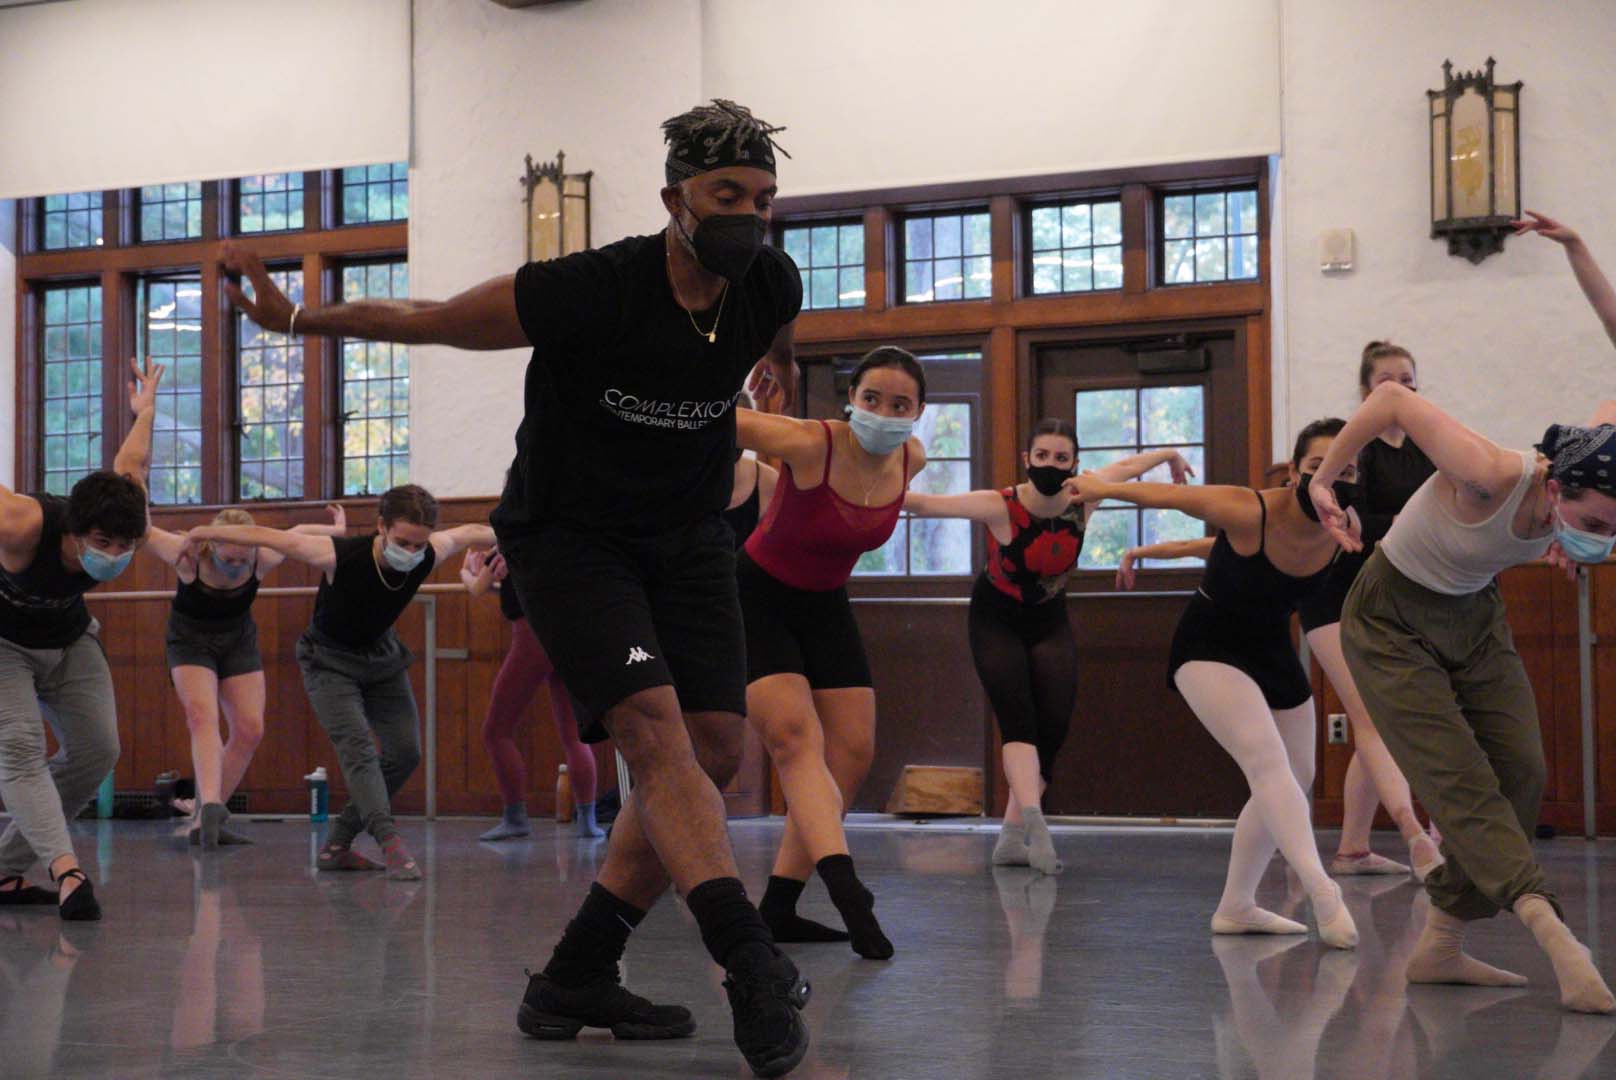 A person wearing a black T-shirt, black shorts, and a black facemask demonstrates a pose in a large, open classroom filled with other students who are also in that pose.